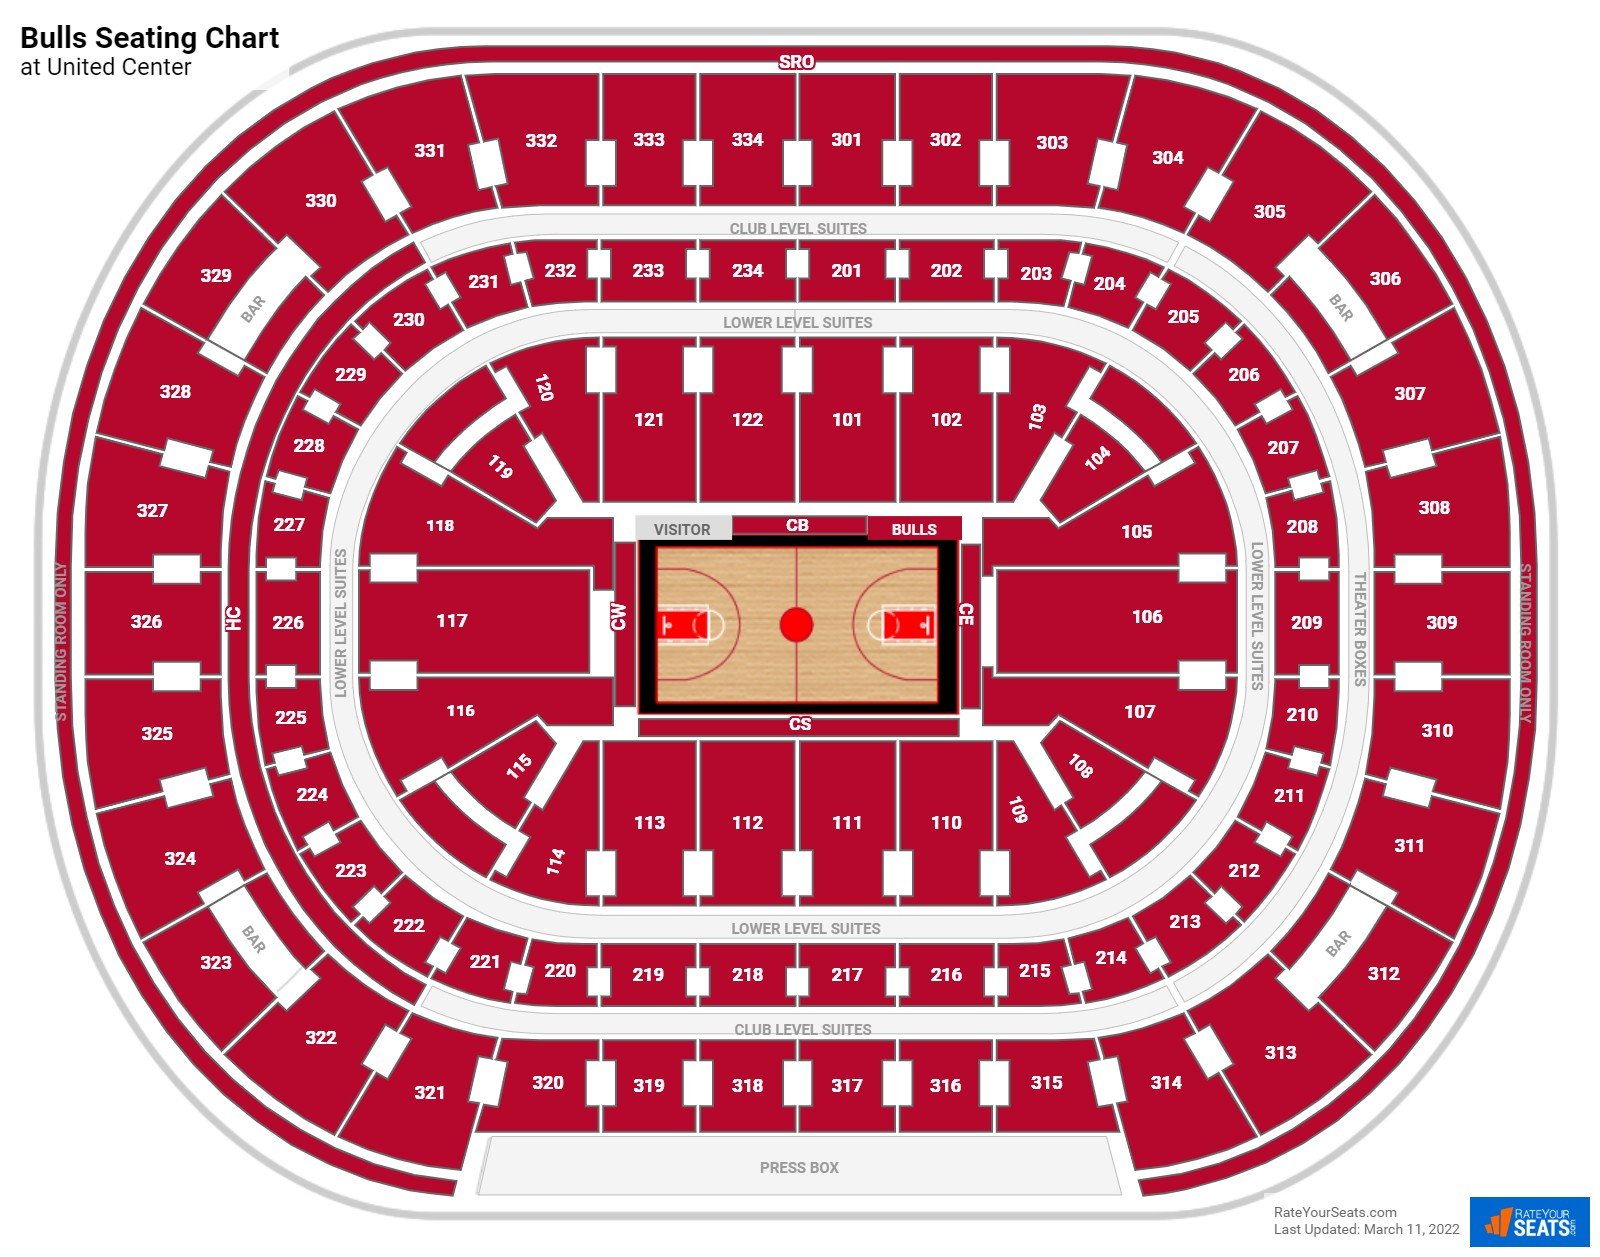 United Center Seating Charts - RateYourSeats.com